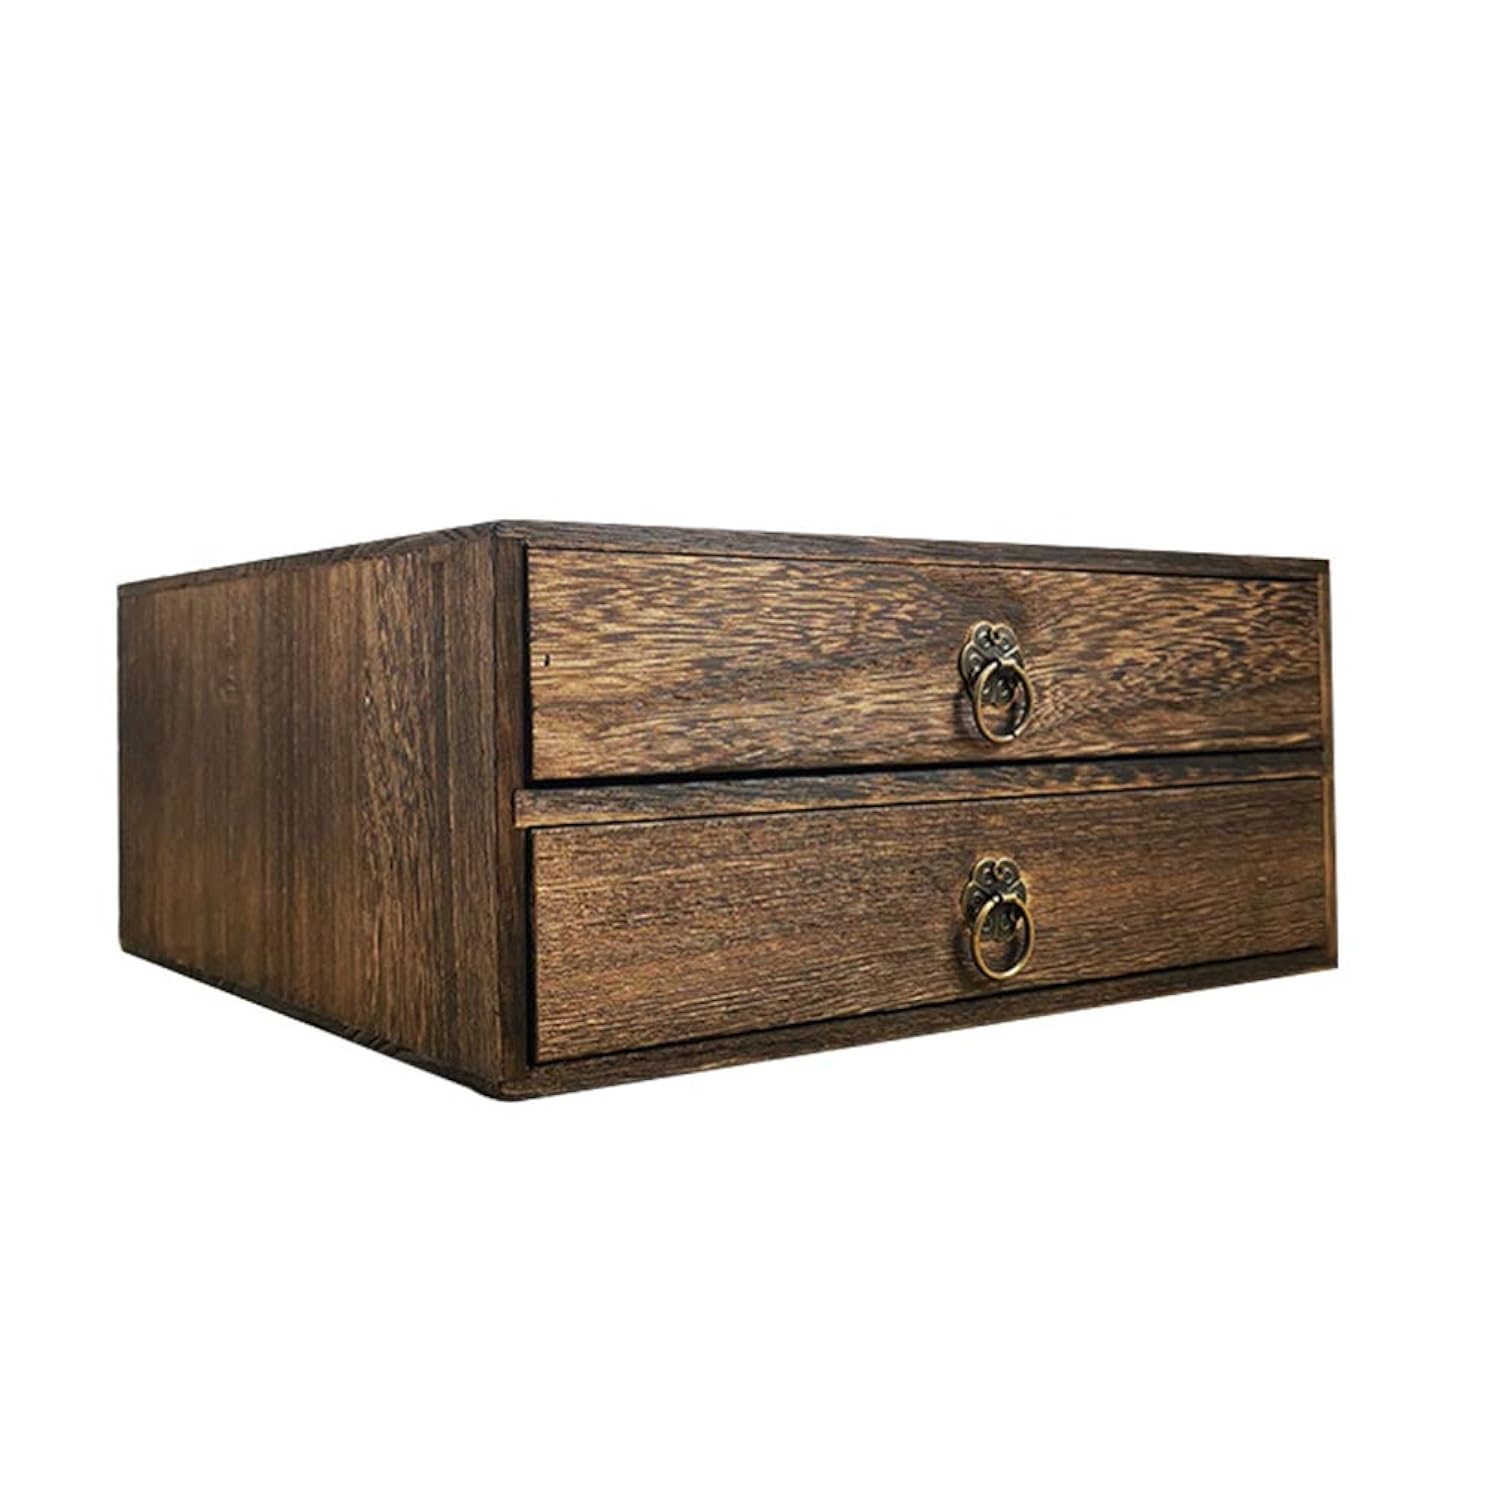 Great Choice Products Small Wooden Storage Box With Drawers 2- Layer Shallow Type Drawers Wood Desktop Storage Cabinet Small Wooden Box Organi?